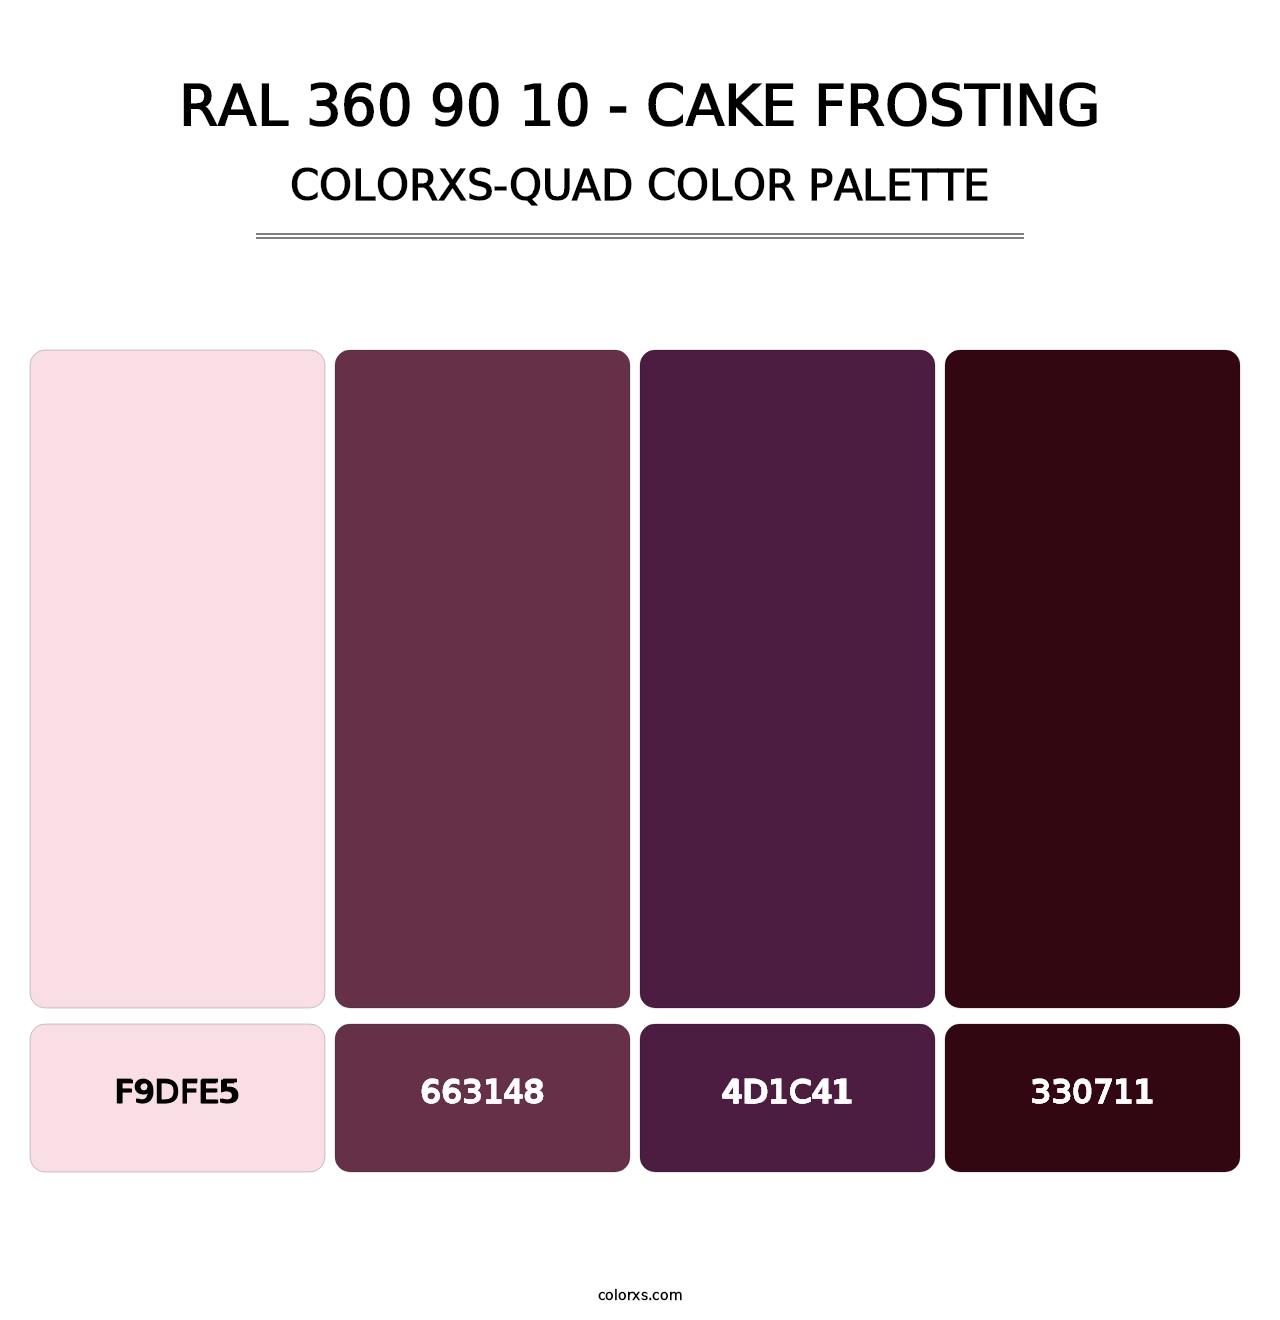 RAL 360 90 10 - Cake Frosting - Colorxs Quad Palette